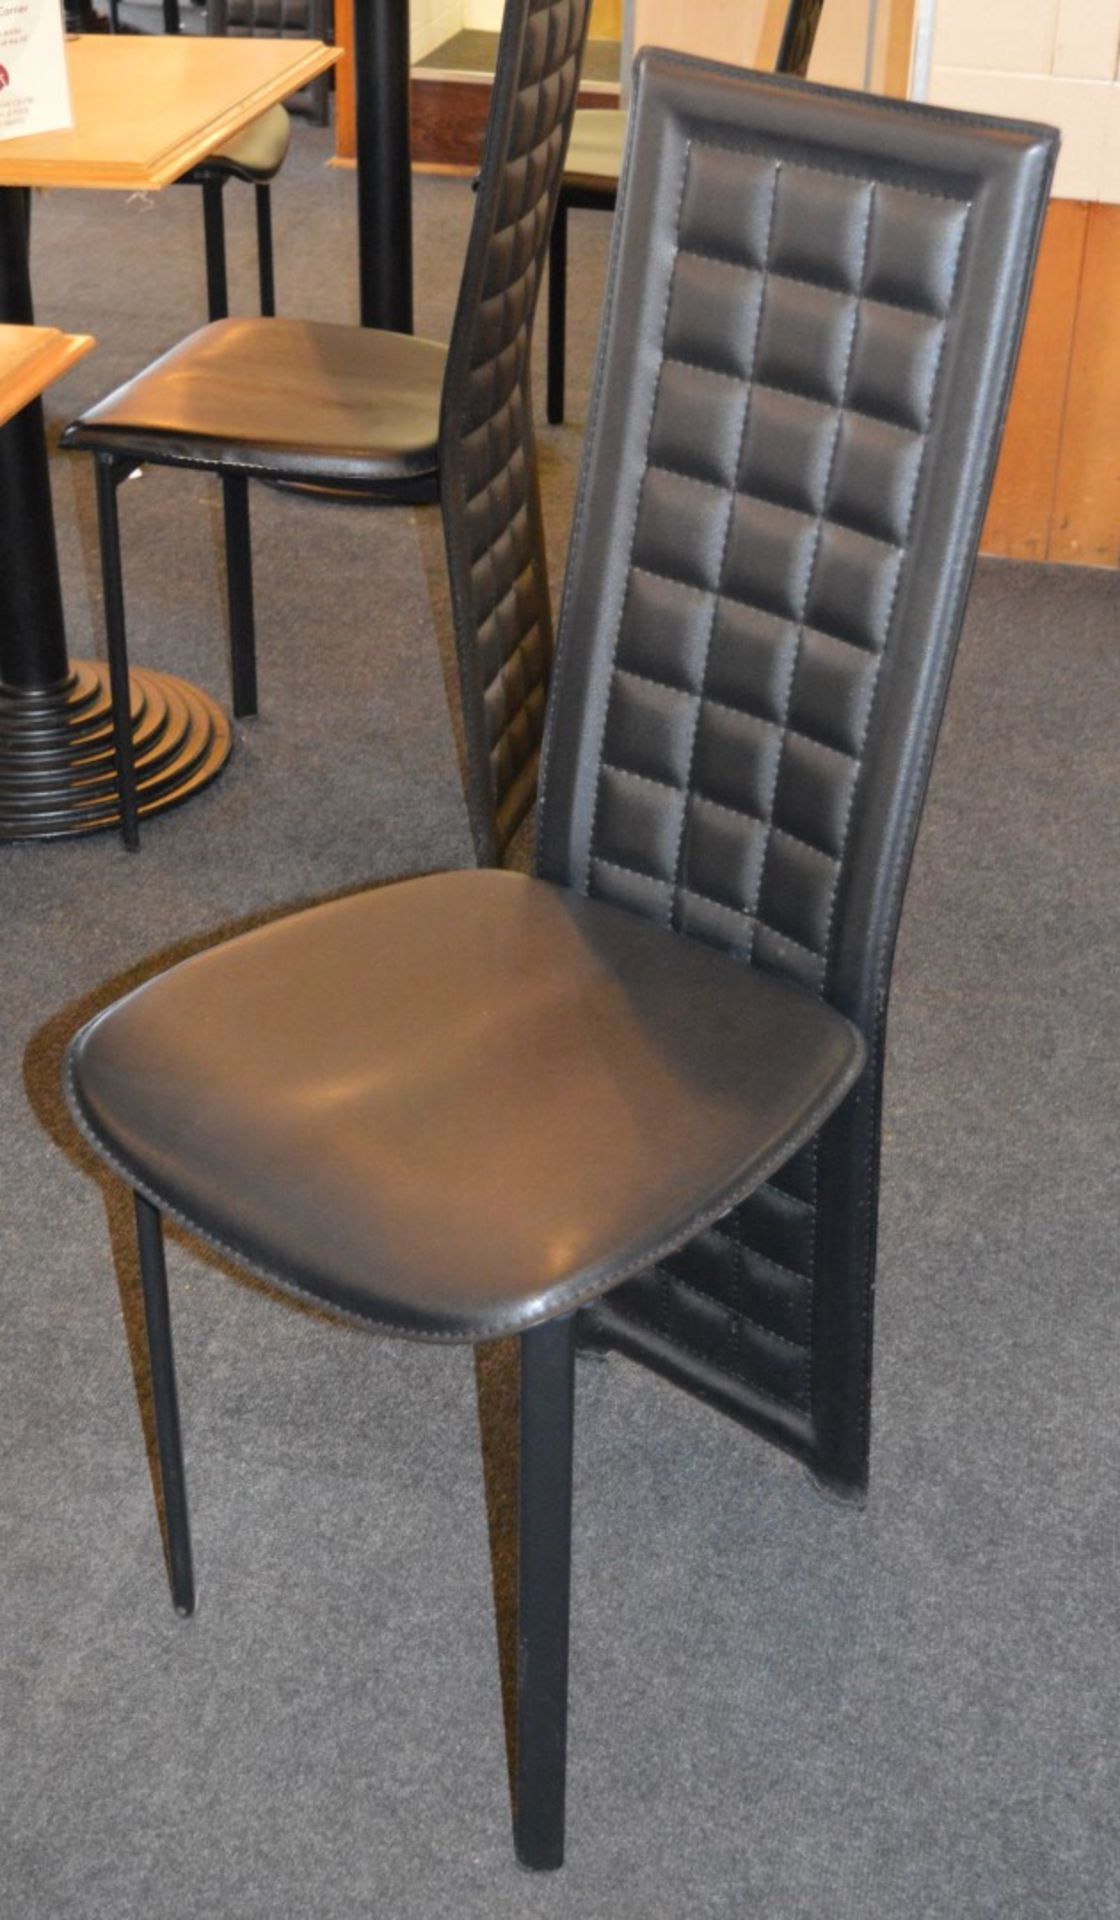 4 x High Back Dining Chairs - Faux Cushioned Leather in Black - H100 x W43 x D50 cms - Used Chairs